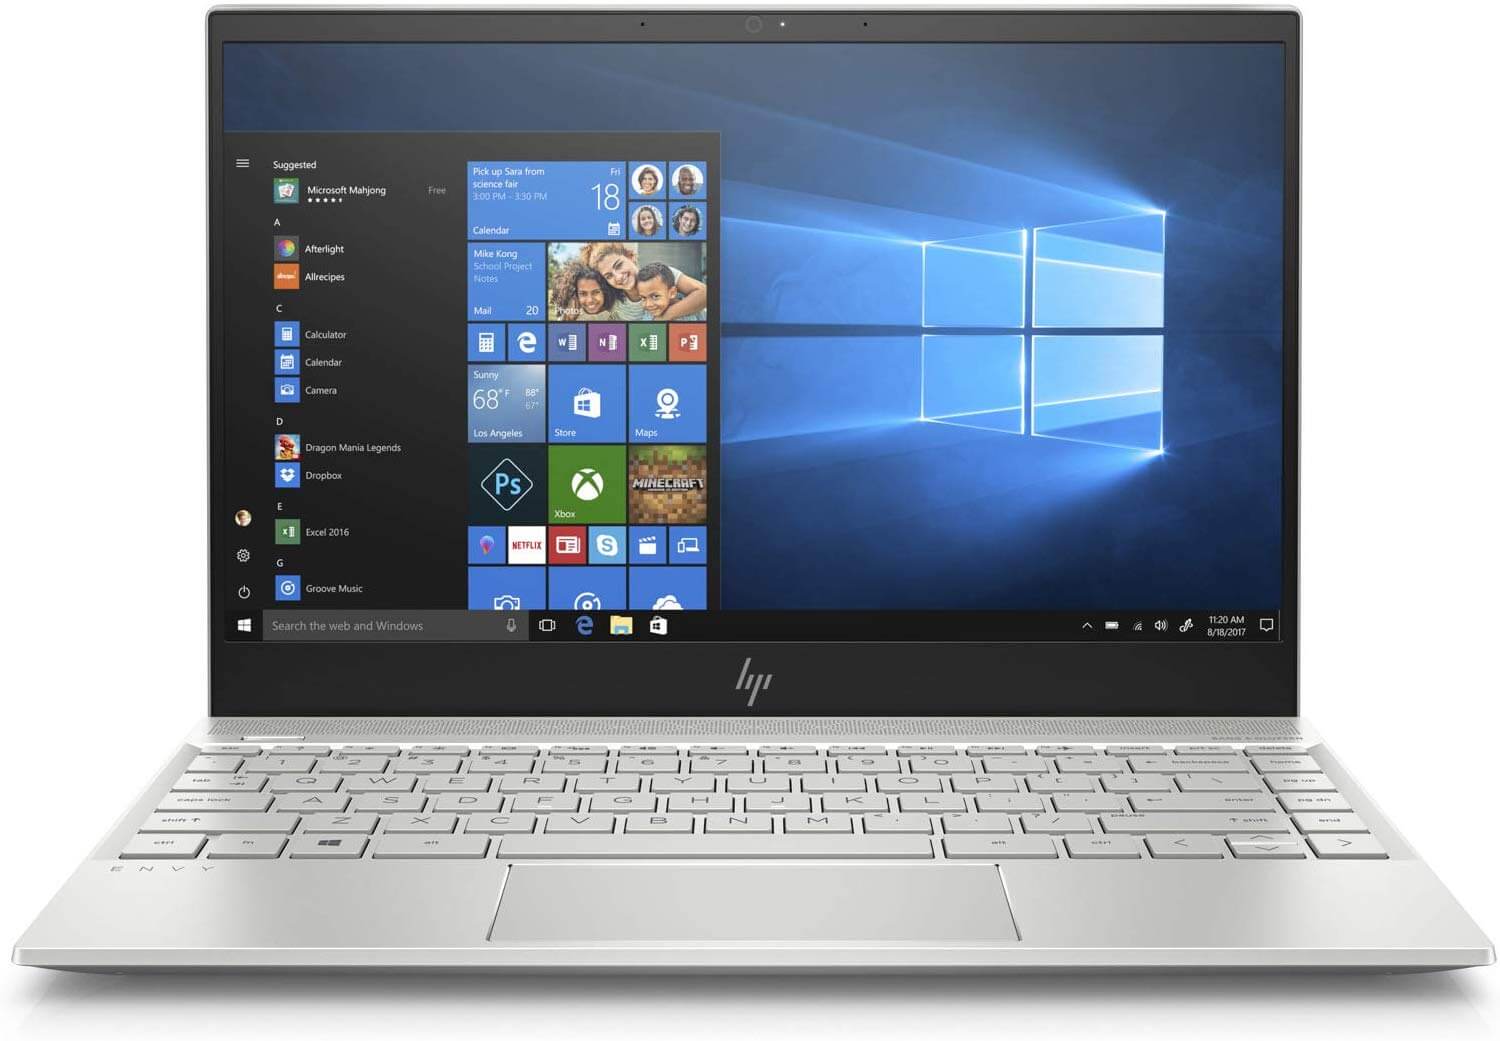 HP Envy 13-ah1001ne Notebook Laptop With 13.3-Inch Display, Core i7 Processor/8GB/256GB SDD/Intel UHD Graphics 620 With English/Arabic Keyboard Silver